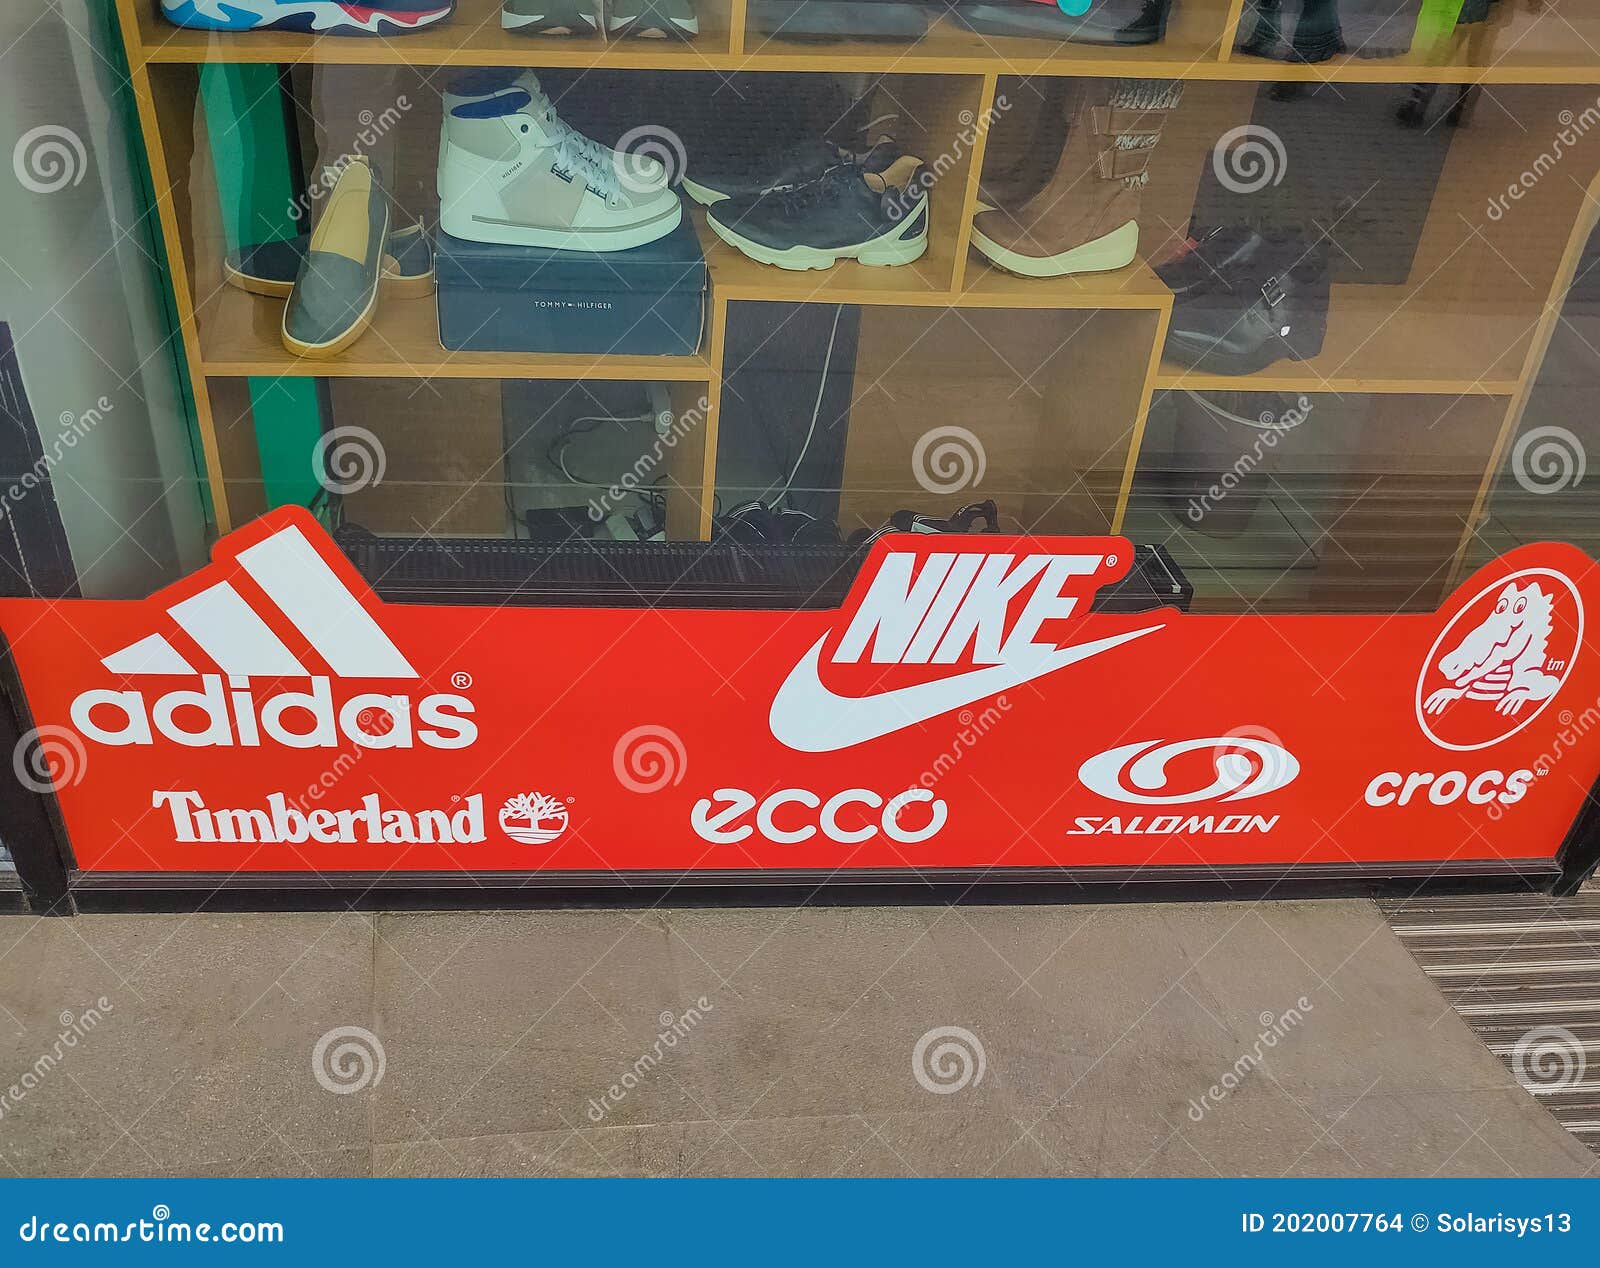 Kyiv, Ukraine - August 16, 2020: Adidas and Nike Sneakers at Street Fashion Store at Kyiv, Ukraine Stock Image - Image of clothes, athletic: 202007764